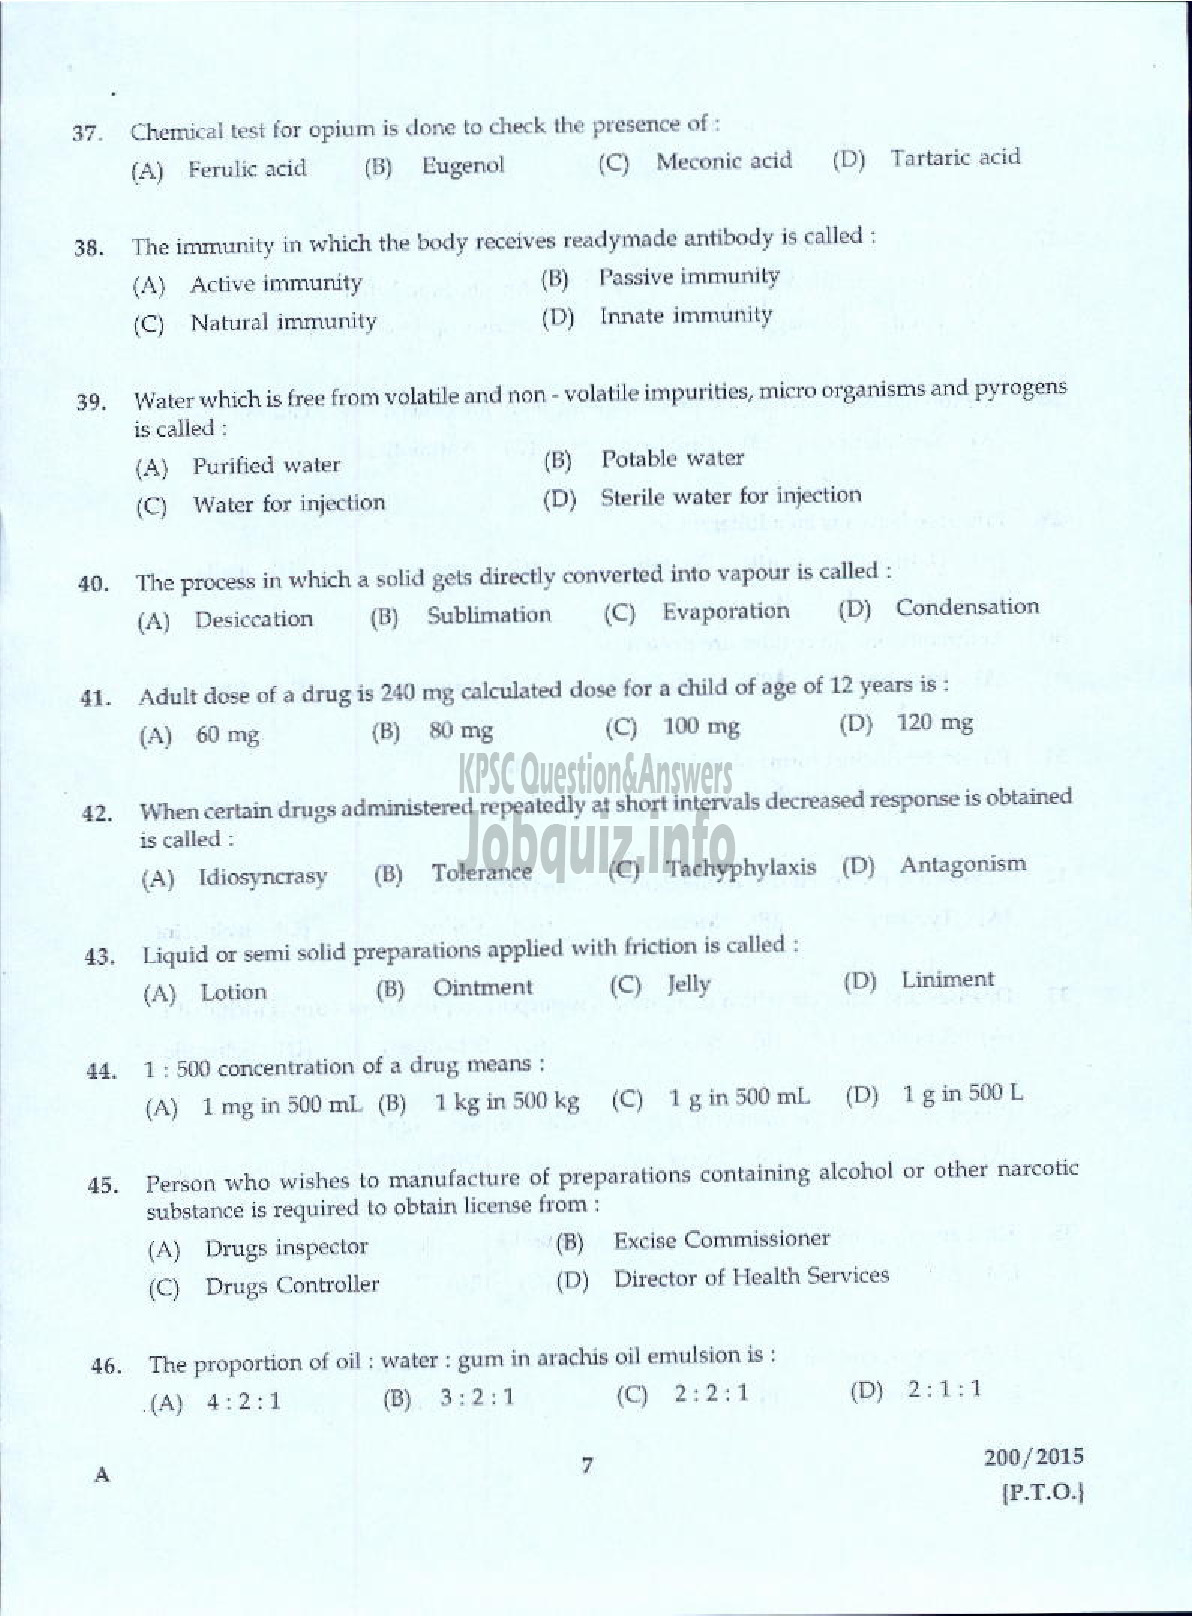 Kerala PSC Question Paper - PHARMACIST GR II HEALTH SERVICES-5